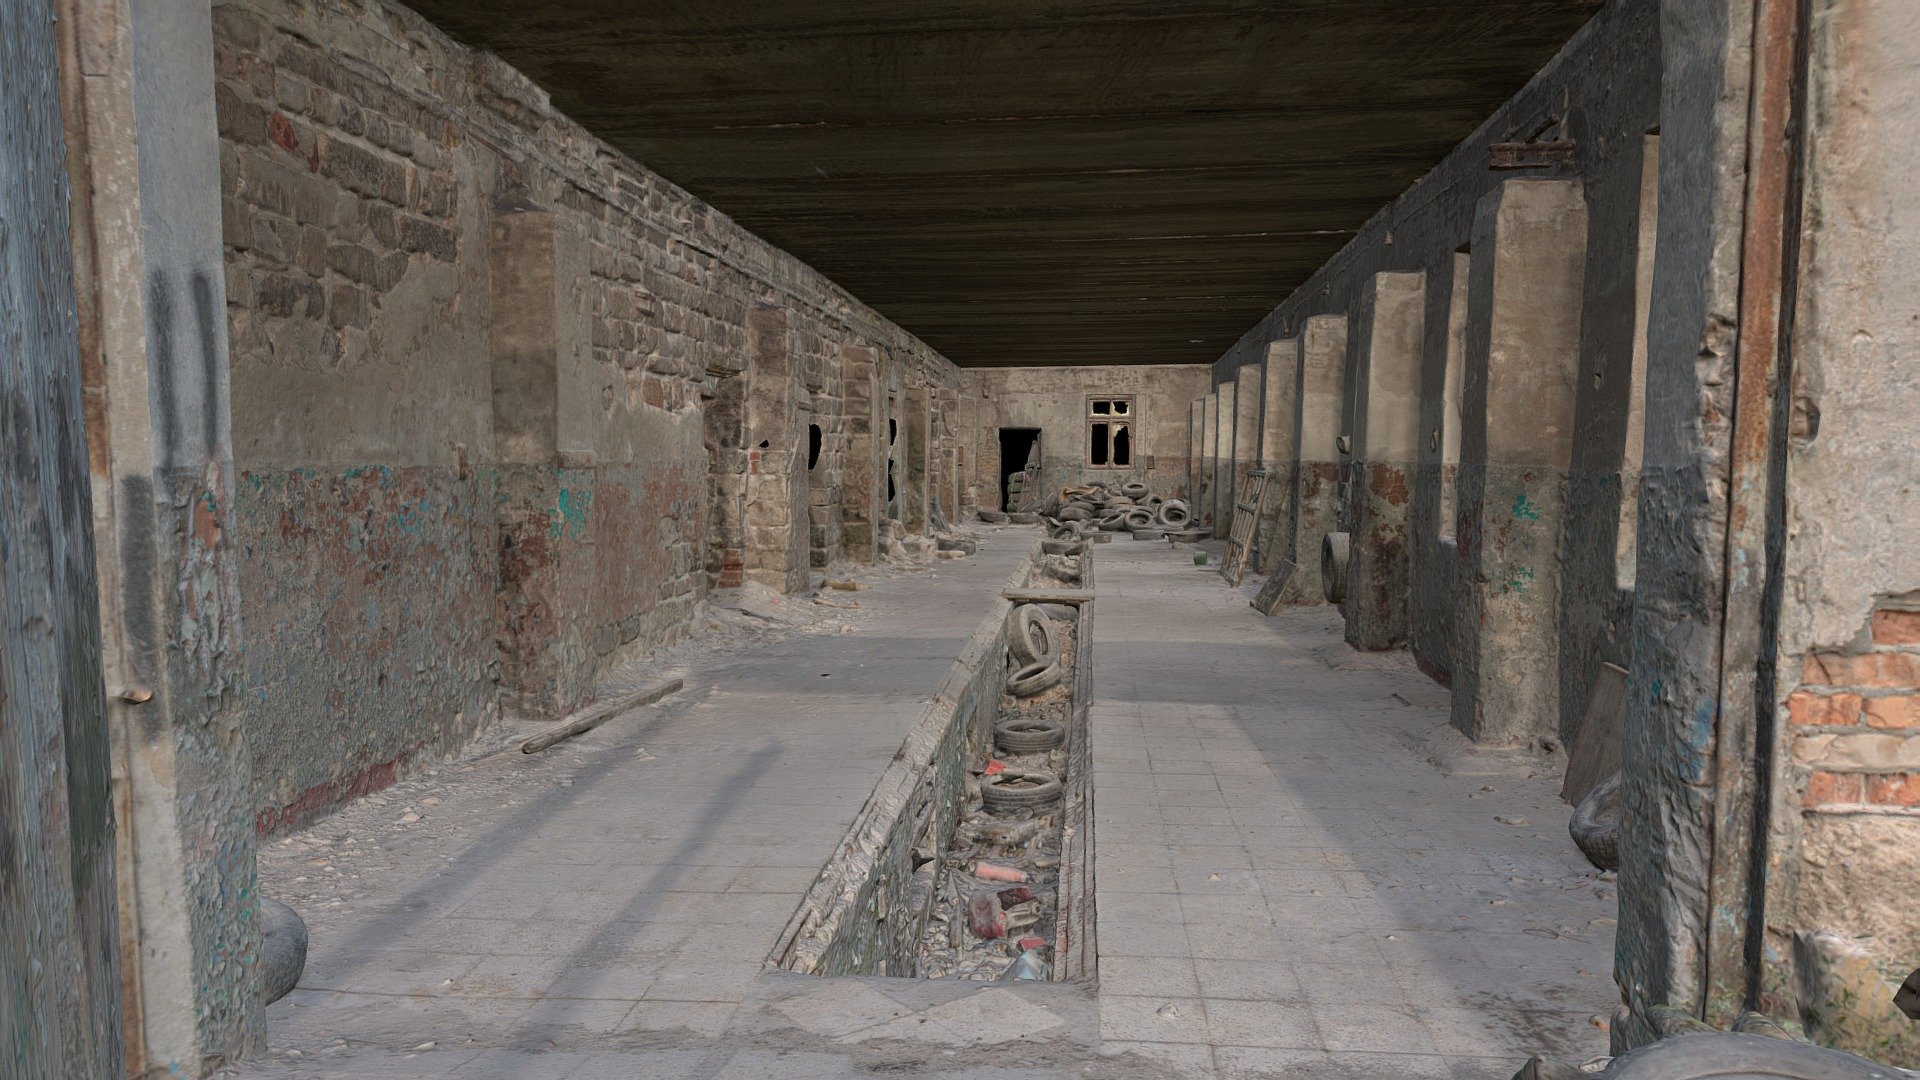 3D scan of the interior of an abandoned soviet industrial building.
Rubber tires on the ground.
With normal map 3d model